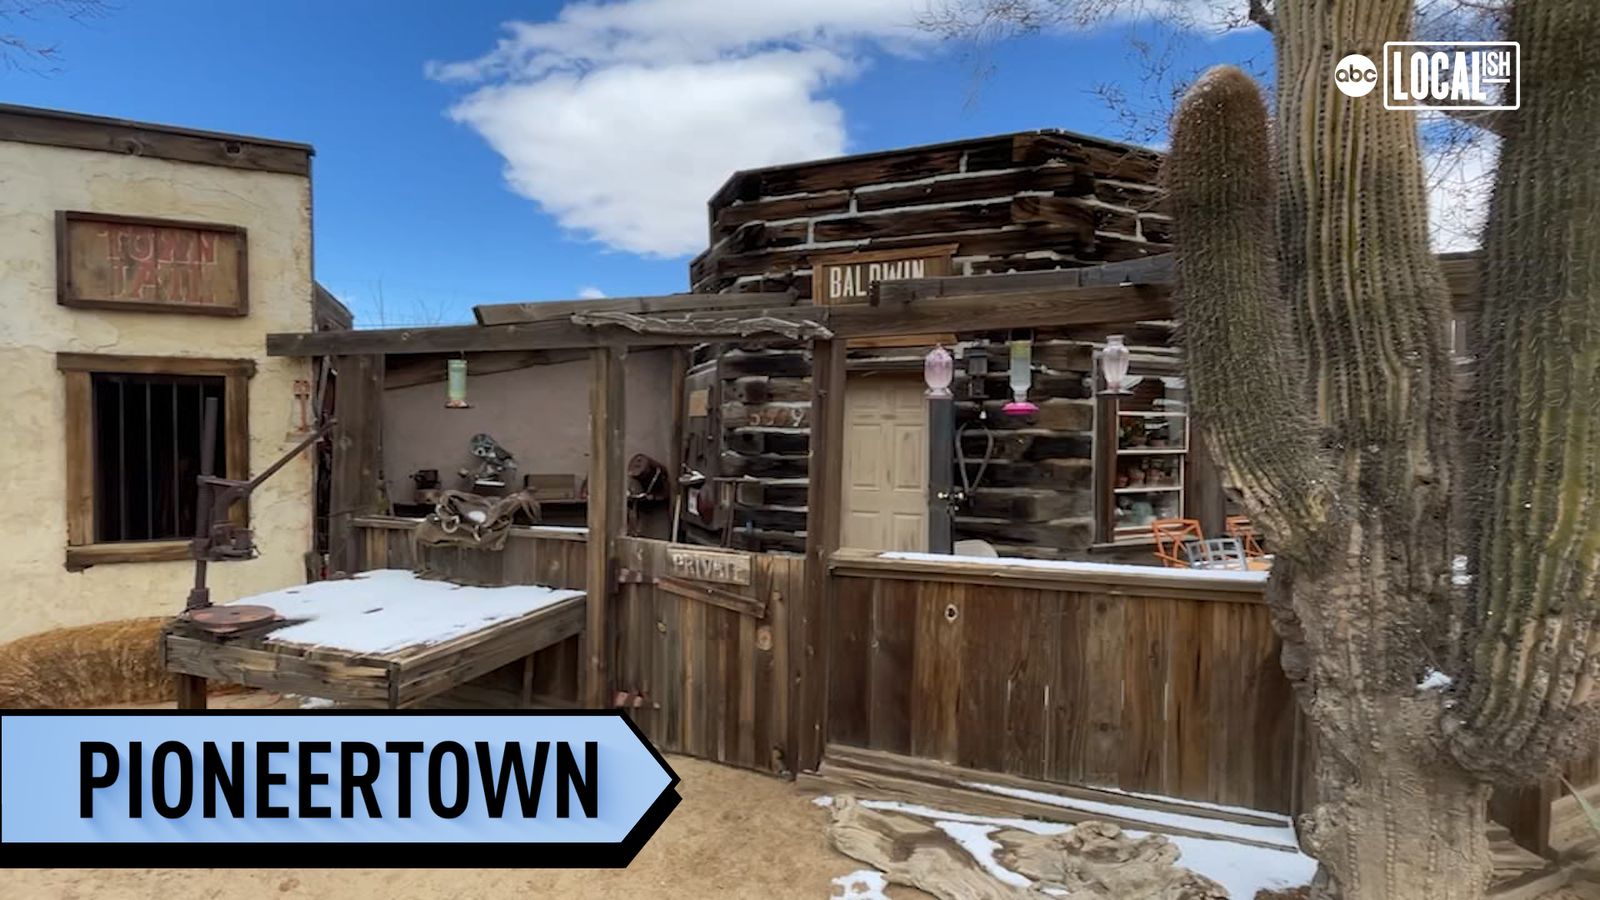 Pioneertown: Celebrating the culture of the American West for 75 years